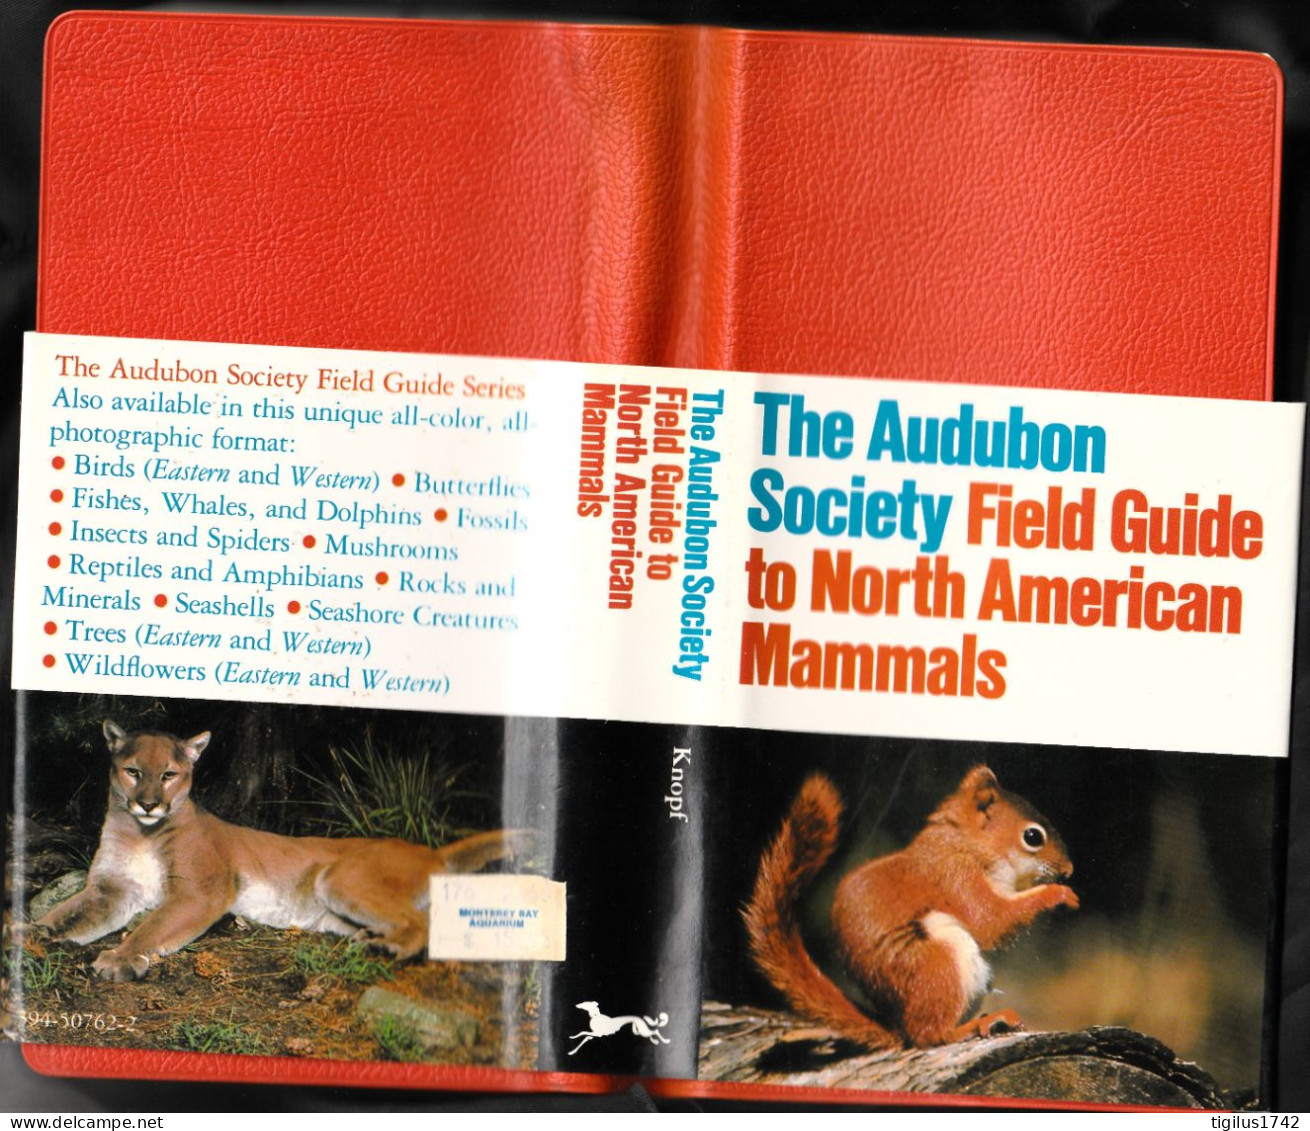 O. Whitaker And Robert Elman. Field Guide To North American Mammals. The Audubon Society, Alfred A. Knopf, New York - Fauna